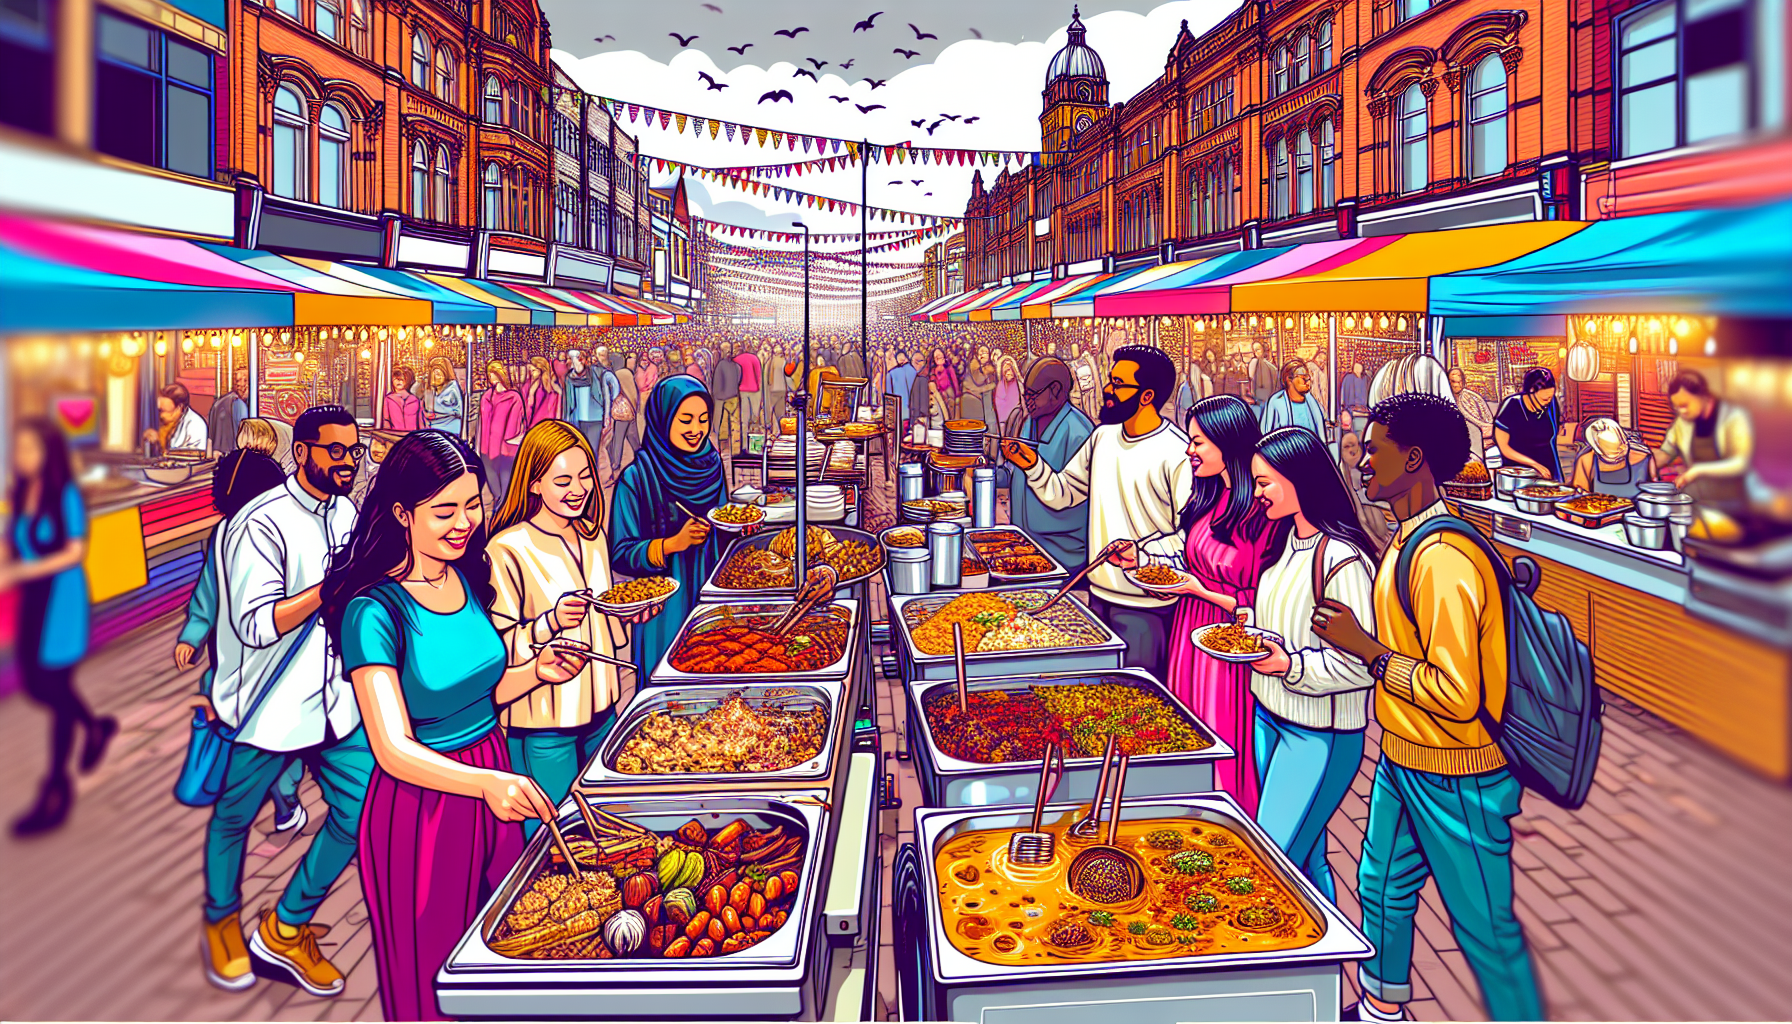 Create an image of a bustling street in Birmingham filled with diverse food stalls and vendors, showcasing a variety of colorful and delicious dishes. Display the vibrant food scene of the city with p